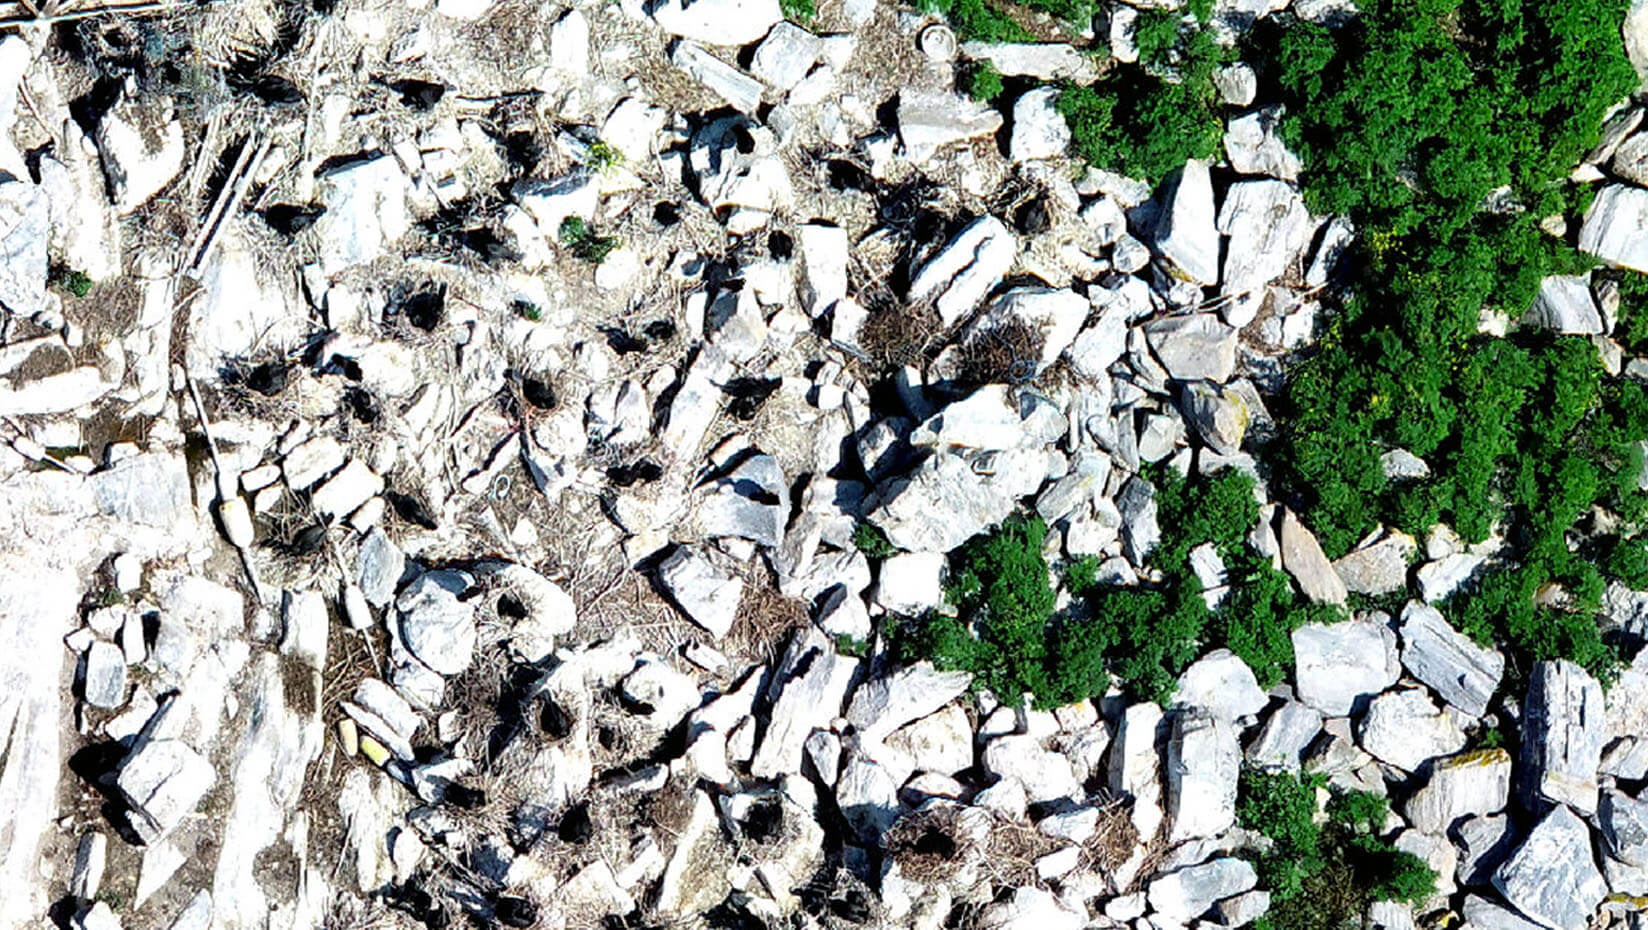 Aerial image of birds on a Maine island